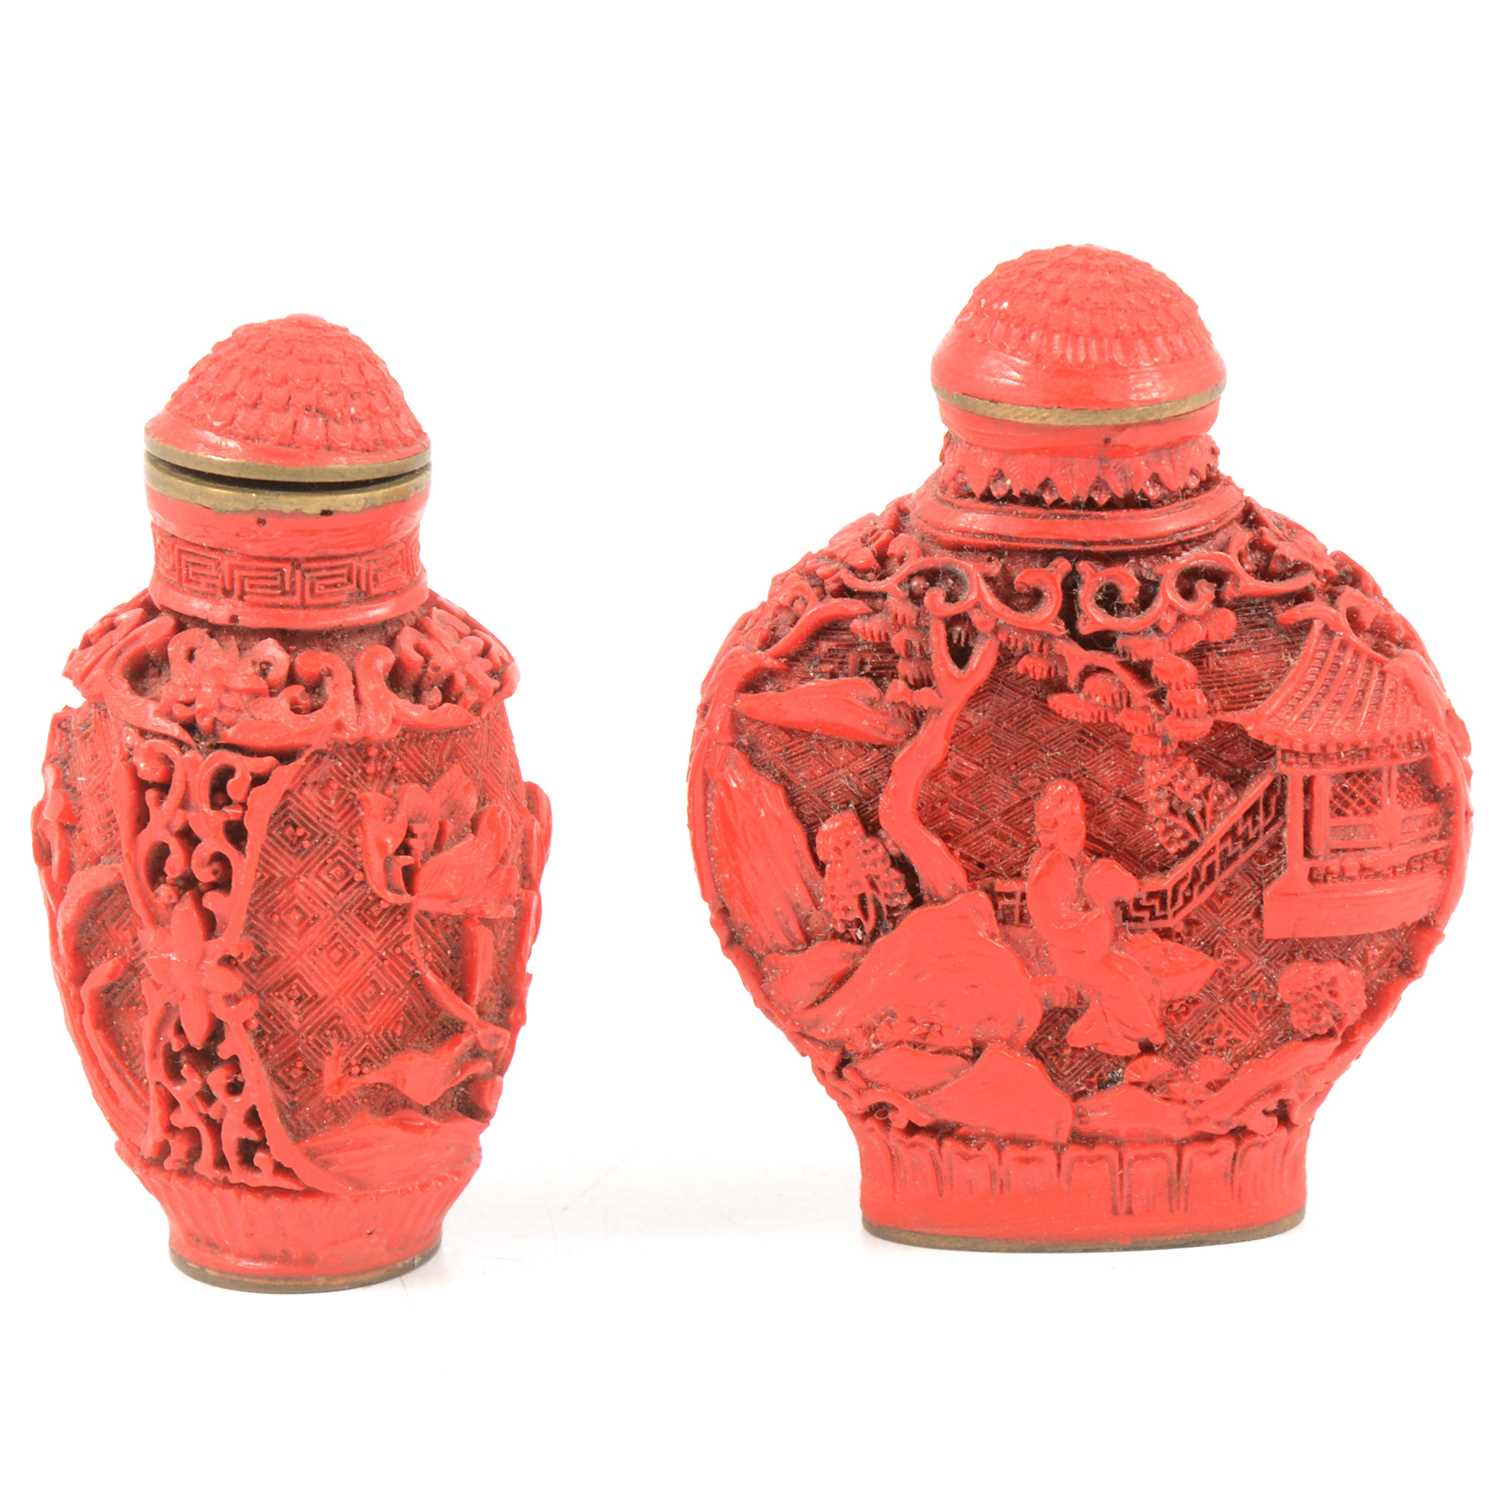 Two Chinese scent bottles, cinnabar-type